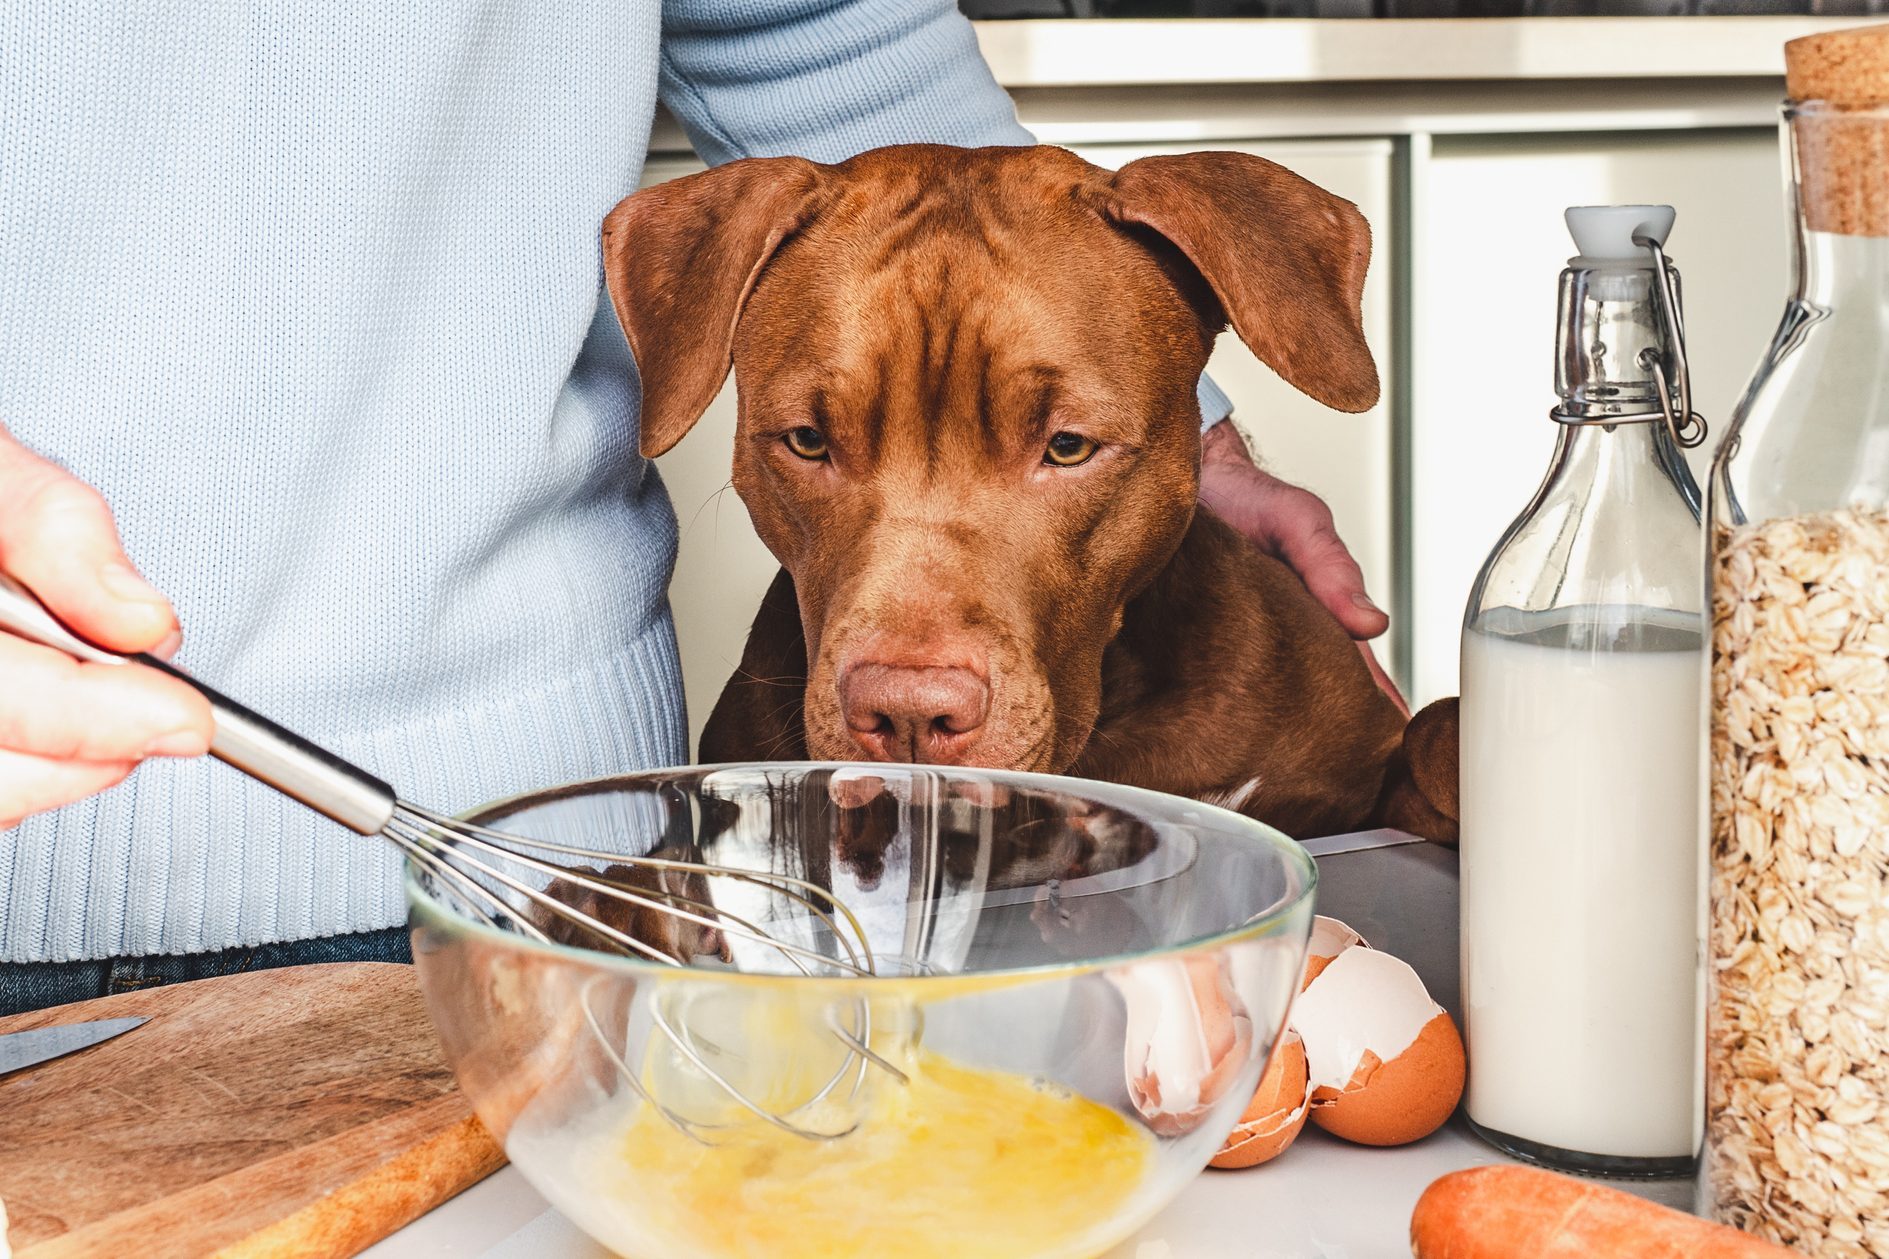 can dogs get salmonella from eating raw eggs